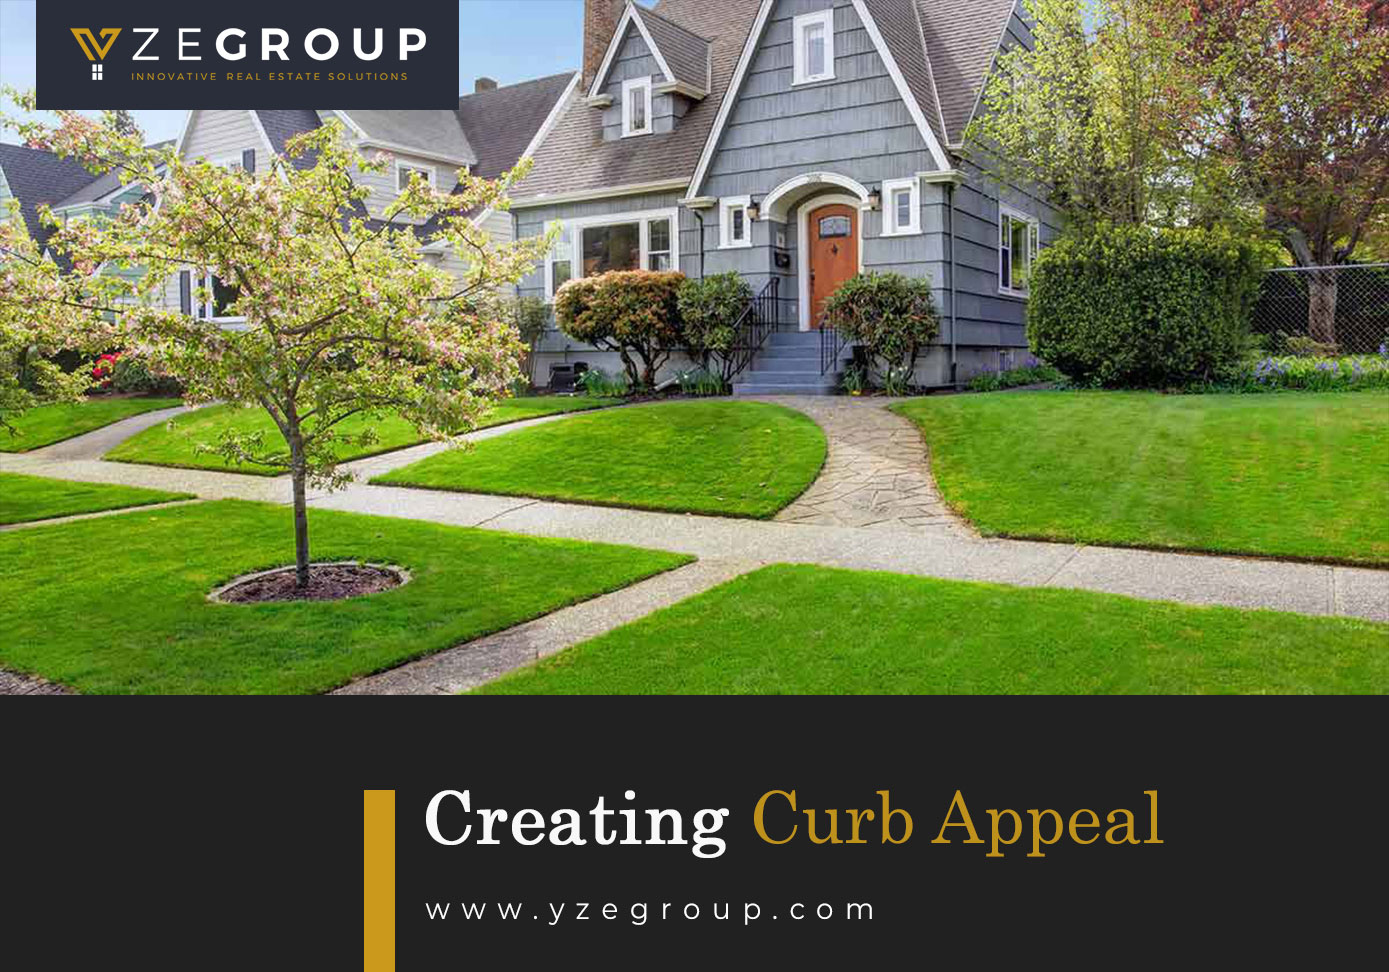 Creating Curb Appeal - Easy hacks to make a stunning first impression